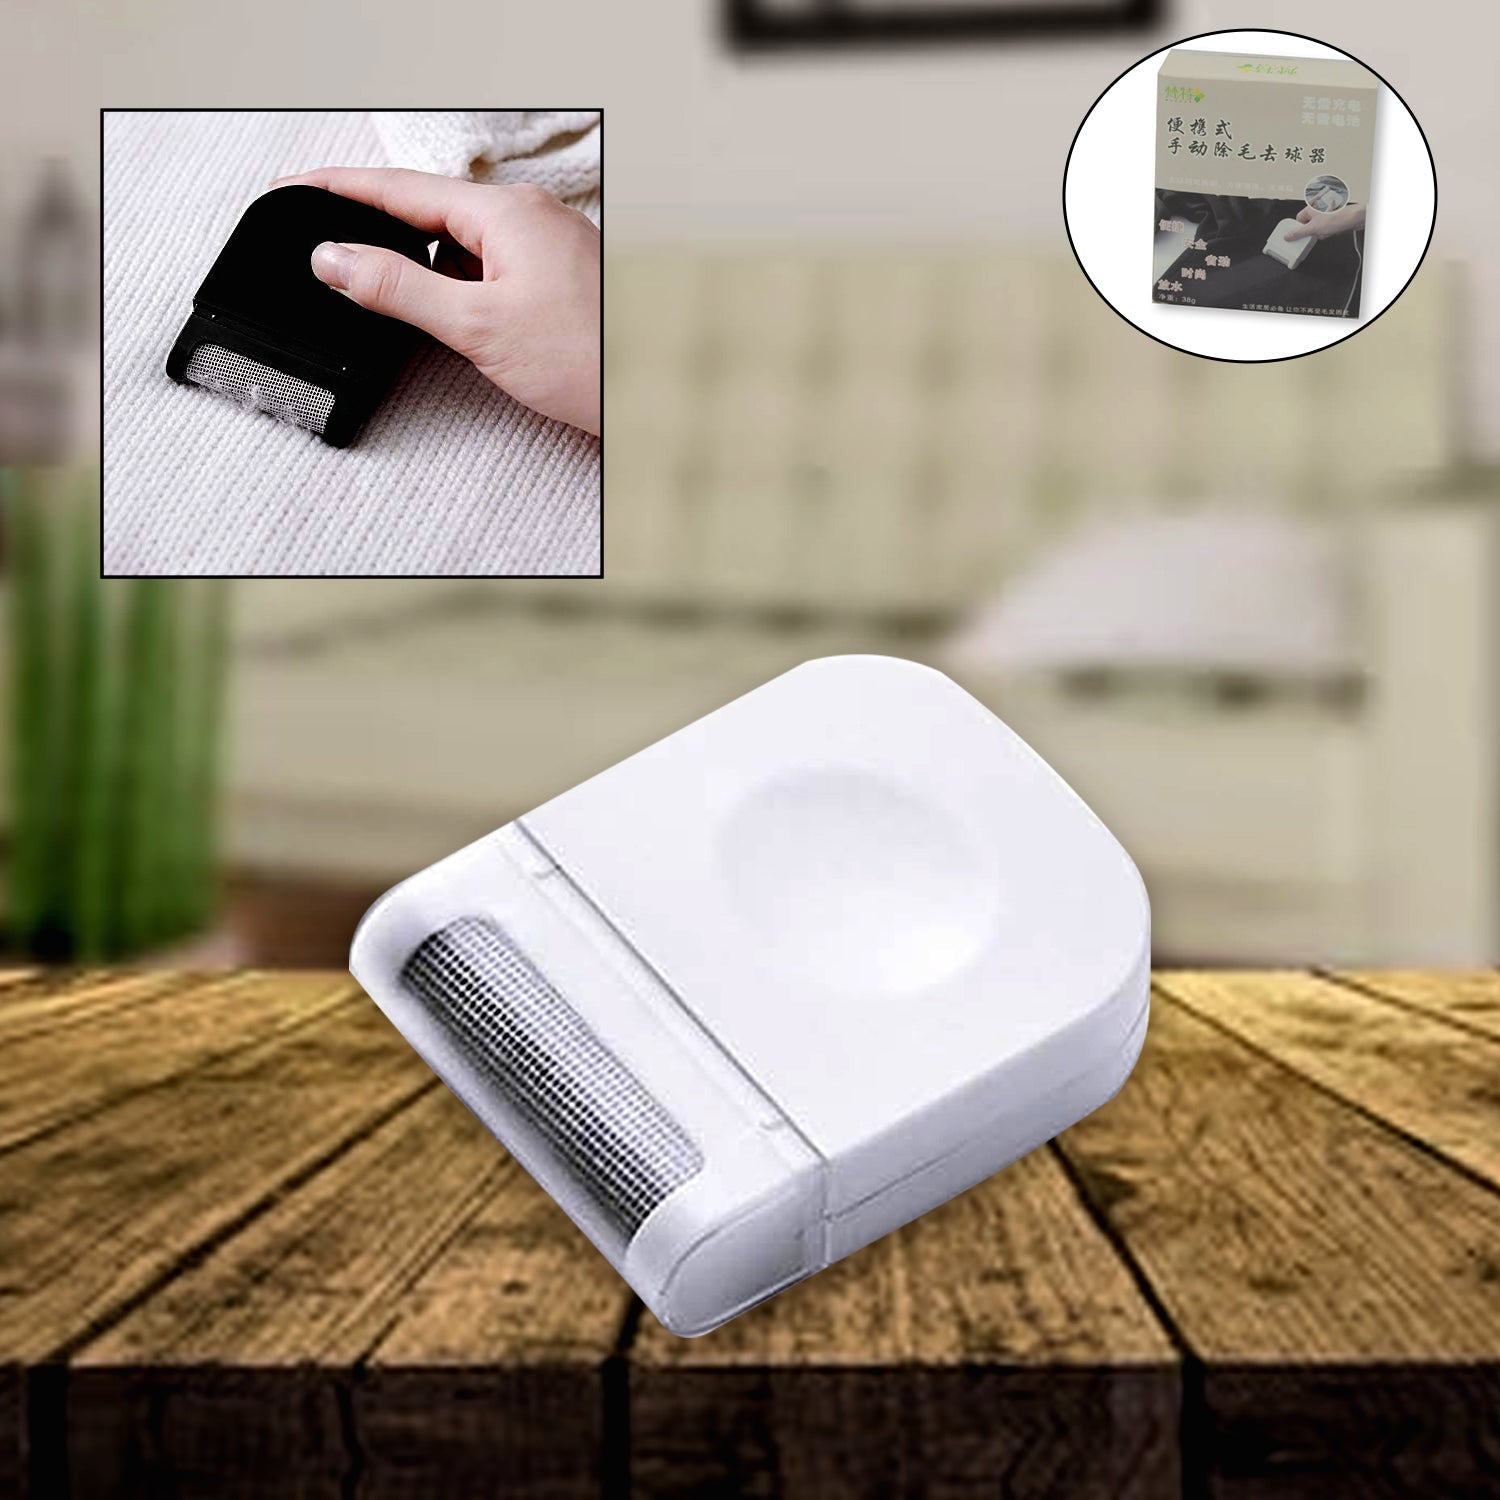 Mini Lint Remover (Re-Usable), for Woolen Sweater & blanket at Rs